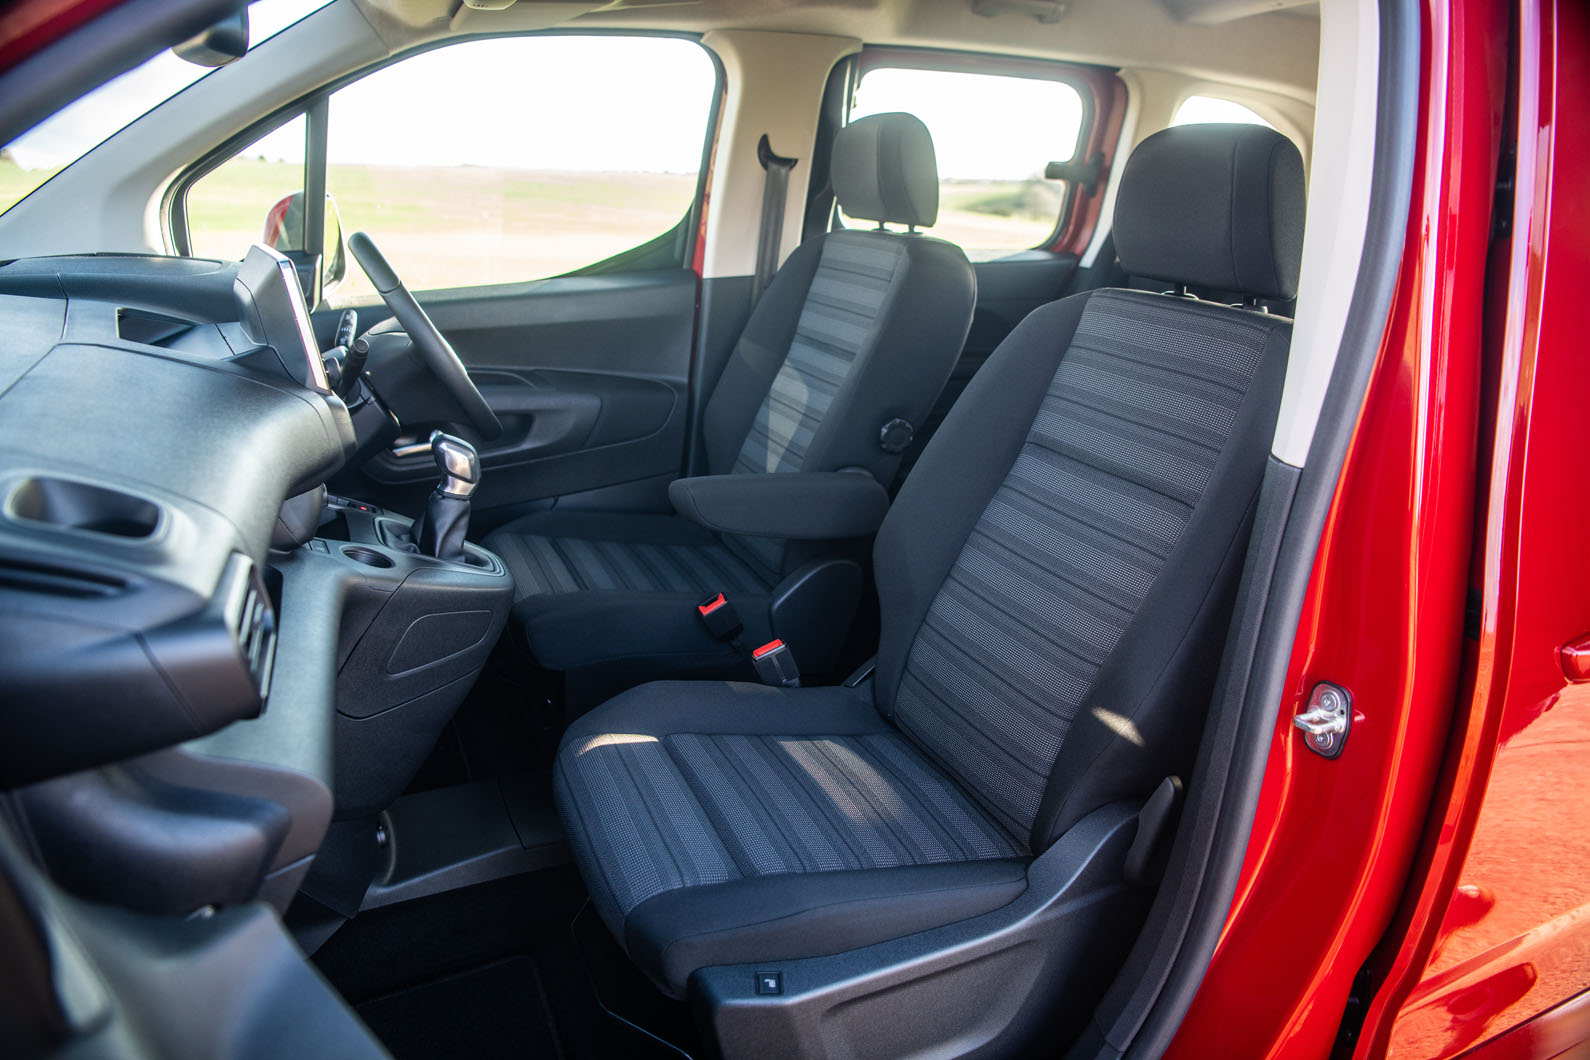 Vauxhall Combo Life 2018 road test review - cabin